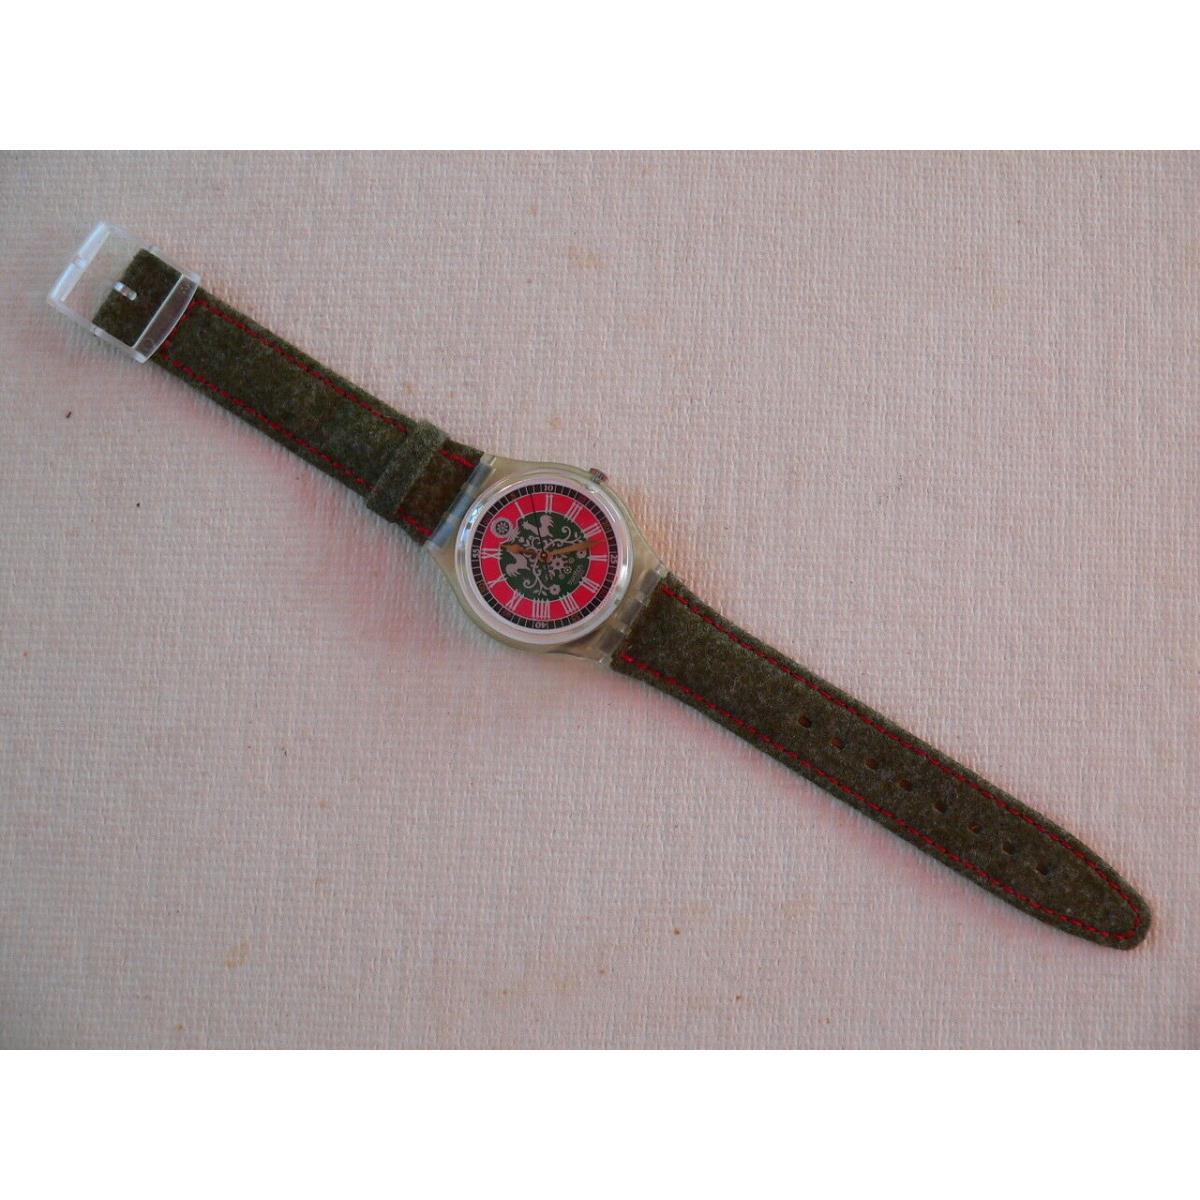 Swatch watch  - Multi-Color Dial, Green Band 1